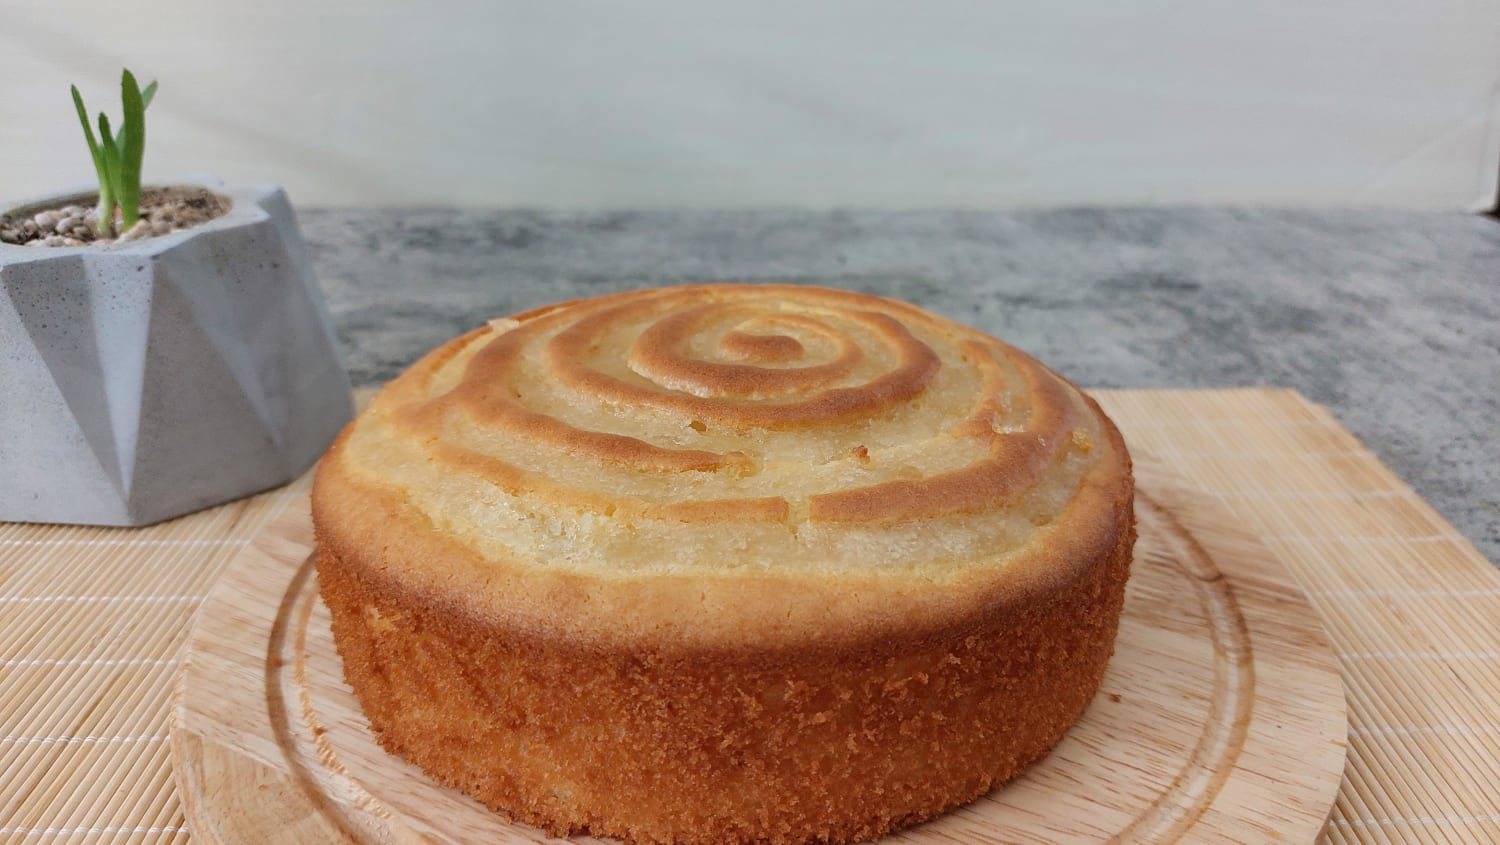 Apricot cake (recipe in the comments)